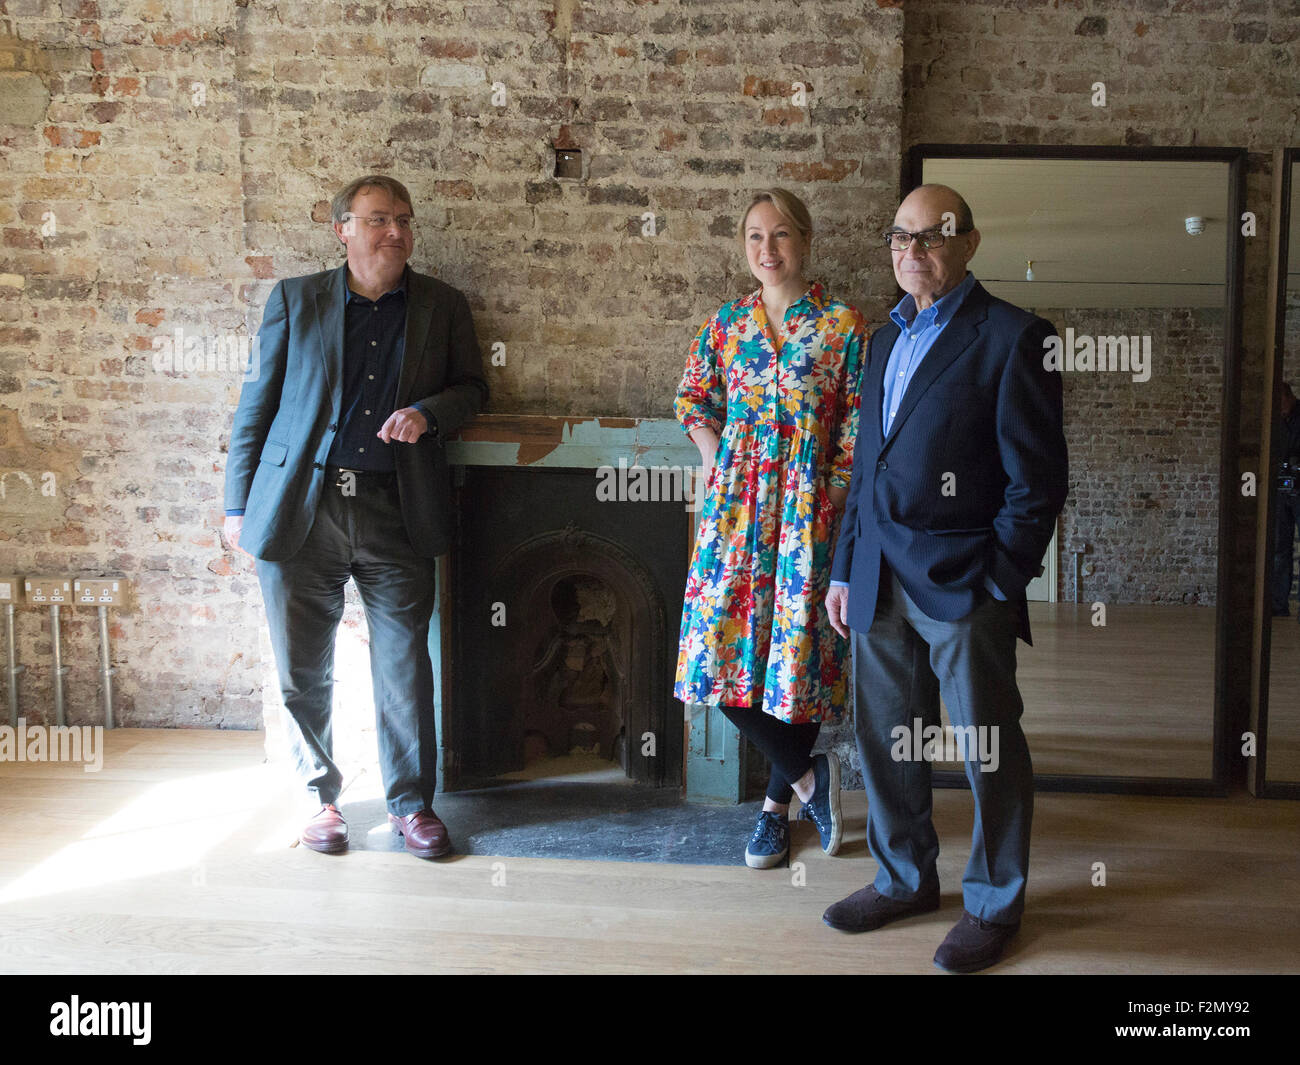 L-R: Architect Tim Ronalds, Frances Mayhew, Artistic Director of Wilton’s and actor David Suchet, a long-time supporter of and Campaign Patron for the Capital Project. Wilton’s Music Hall is one of the last and oldest surviving grand music halls in the world and has been refurbished for GBP 4m with funding from the Capital Project. The Capital Project to repair Wilton’s started in 2011 (Phase 1) with the repair of the main auditorium space. Wilton’s has now arrived at the end of the final phase (Phase 2) of works which has seen many p Stock Photo